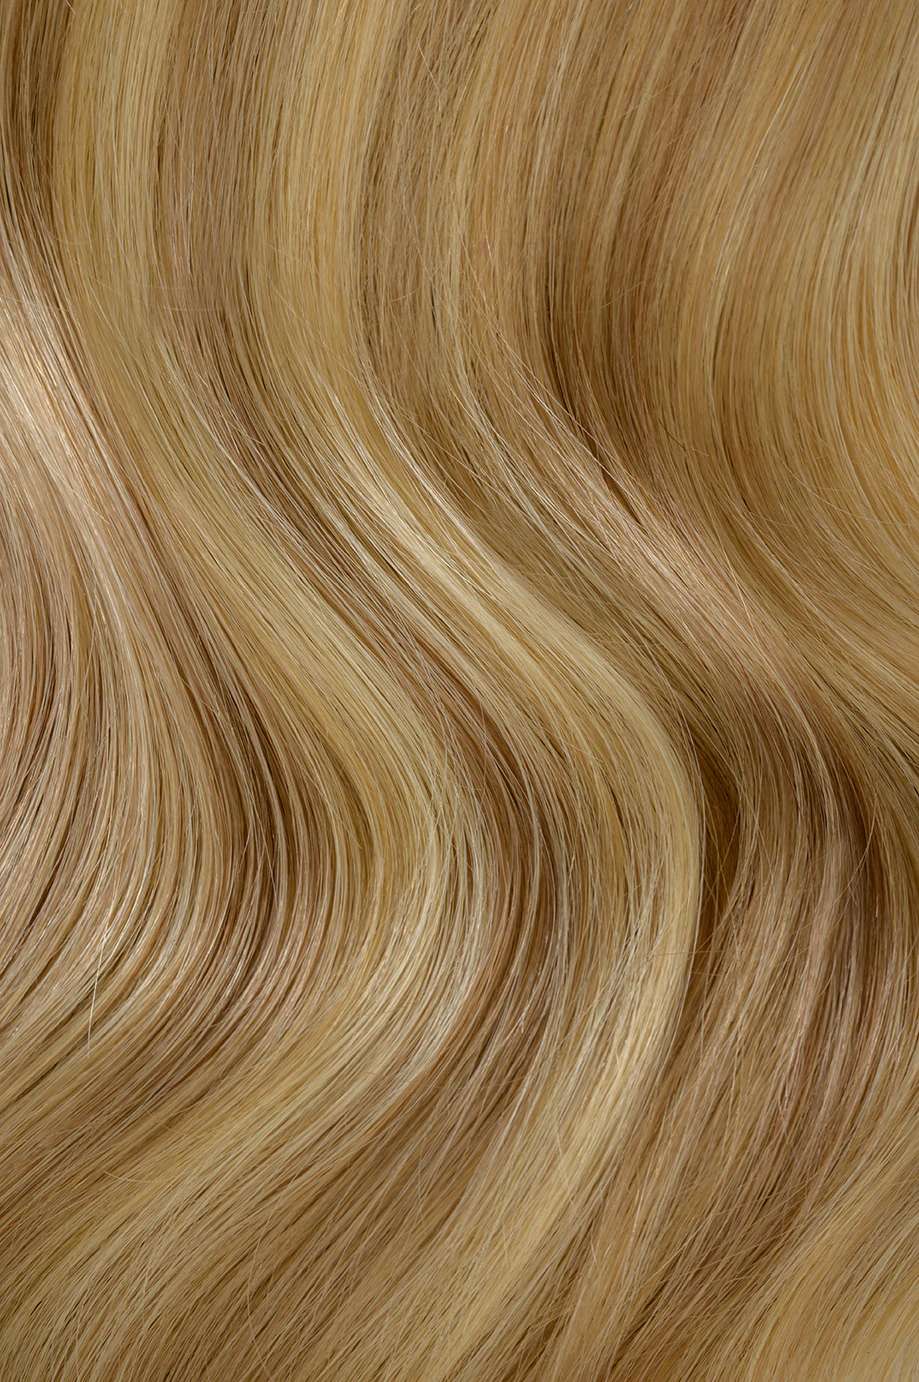 #16/22 Caramel Light Blonde Classic Halo Hair Extensions